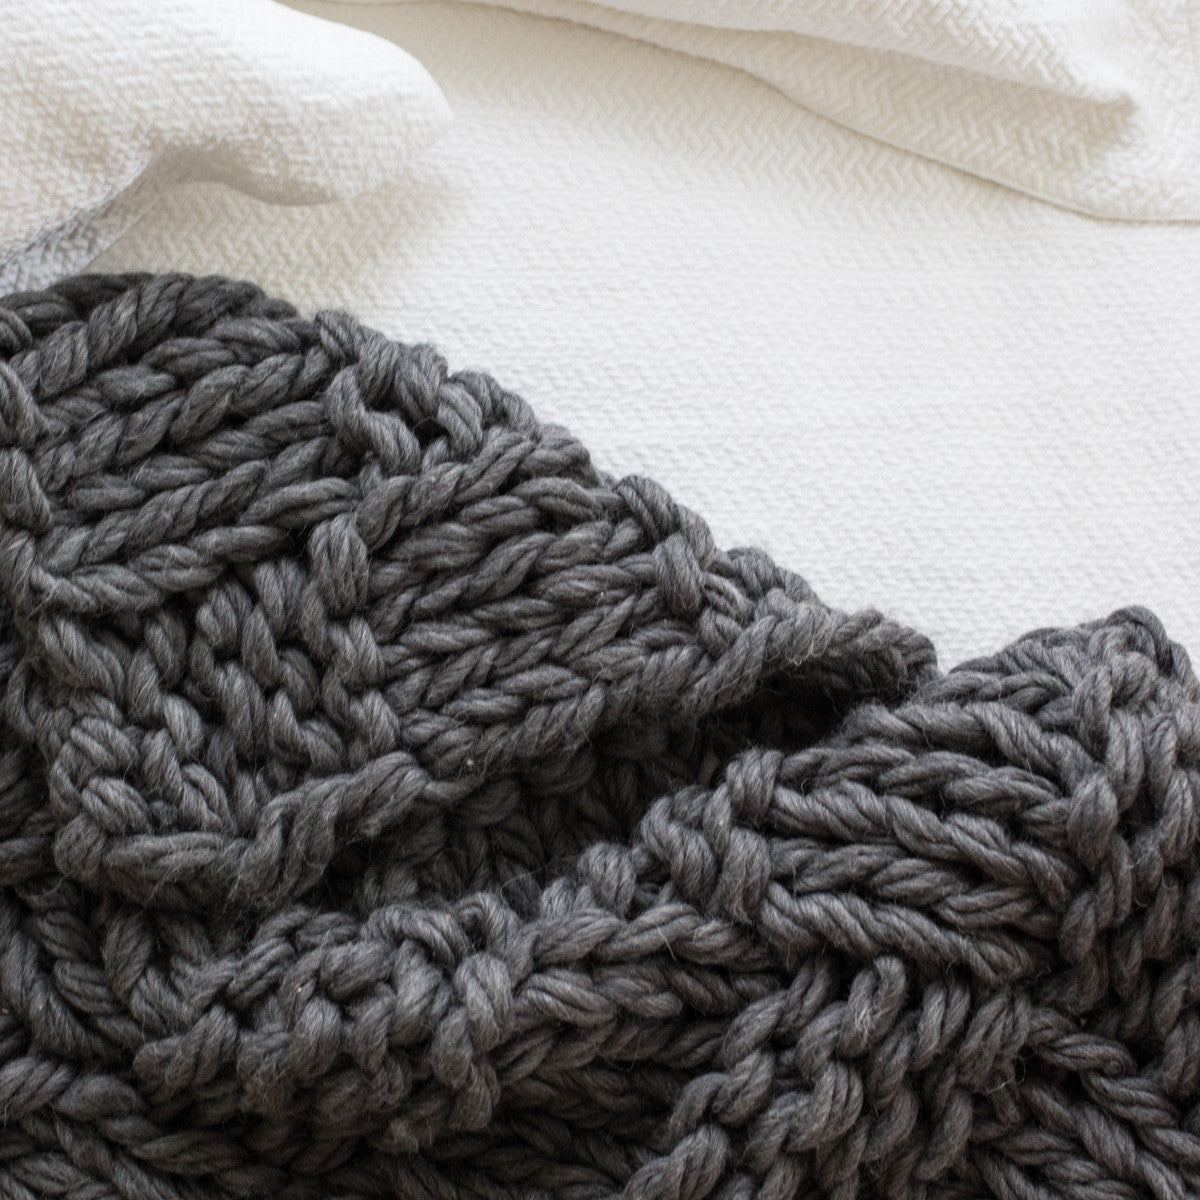 Arm Knit Ribbed Blanket DIY KIT by Flax & Twine